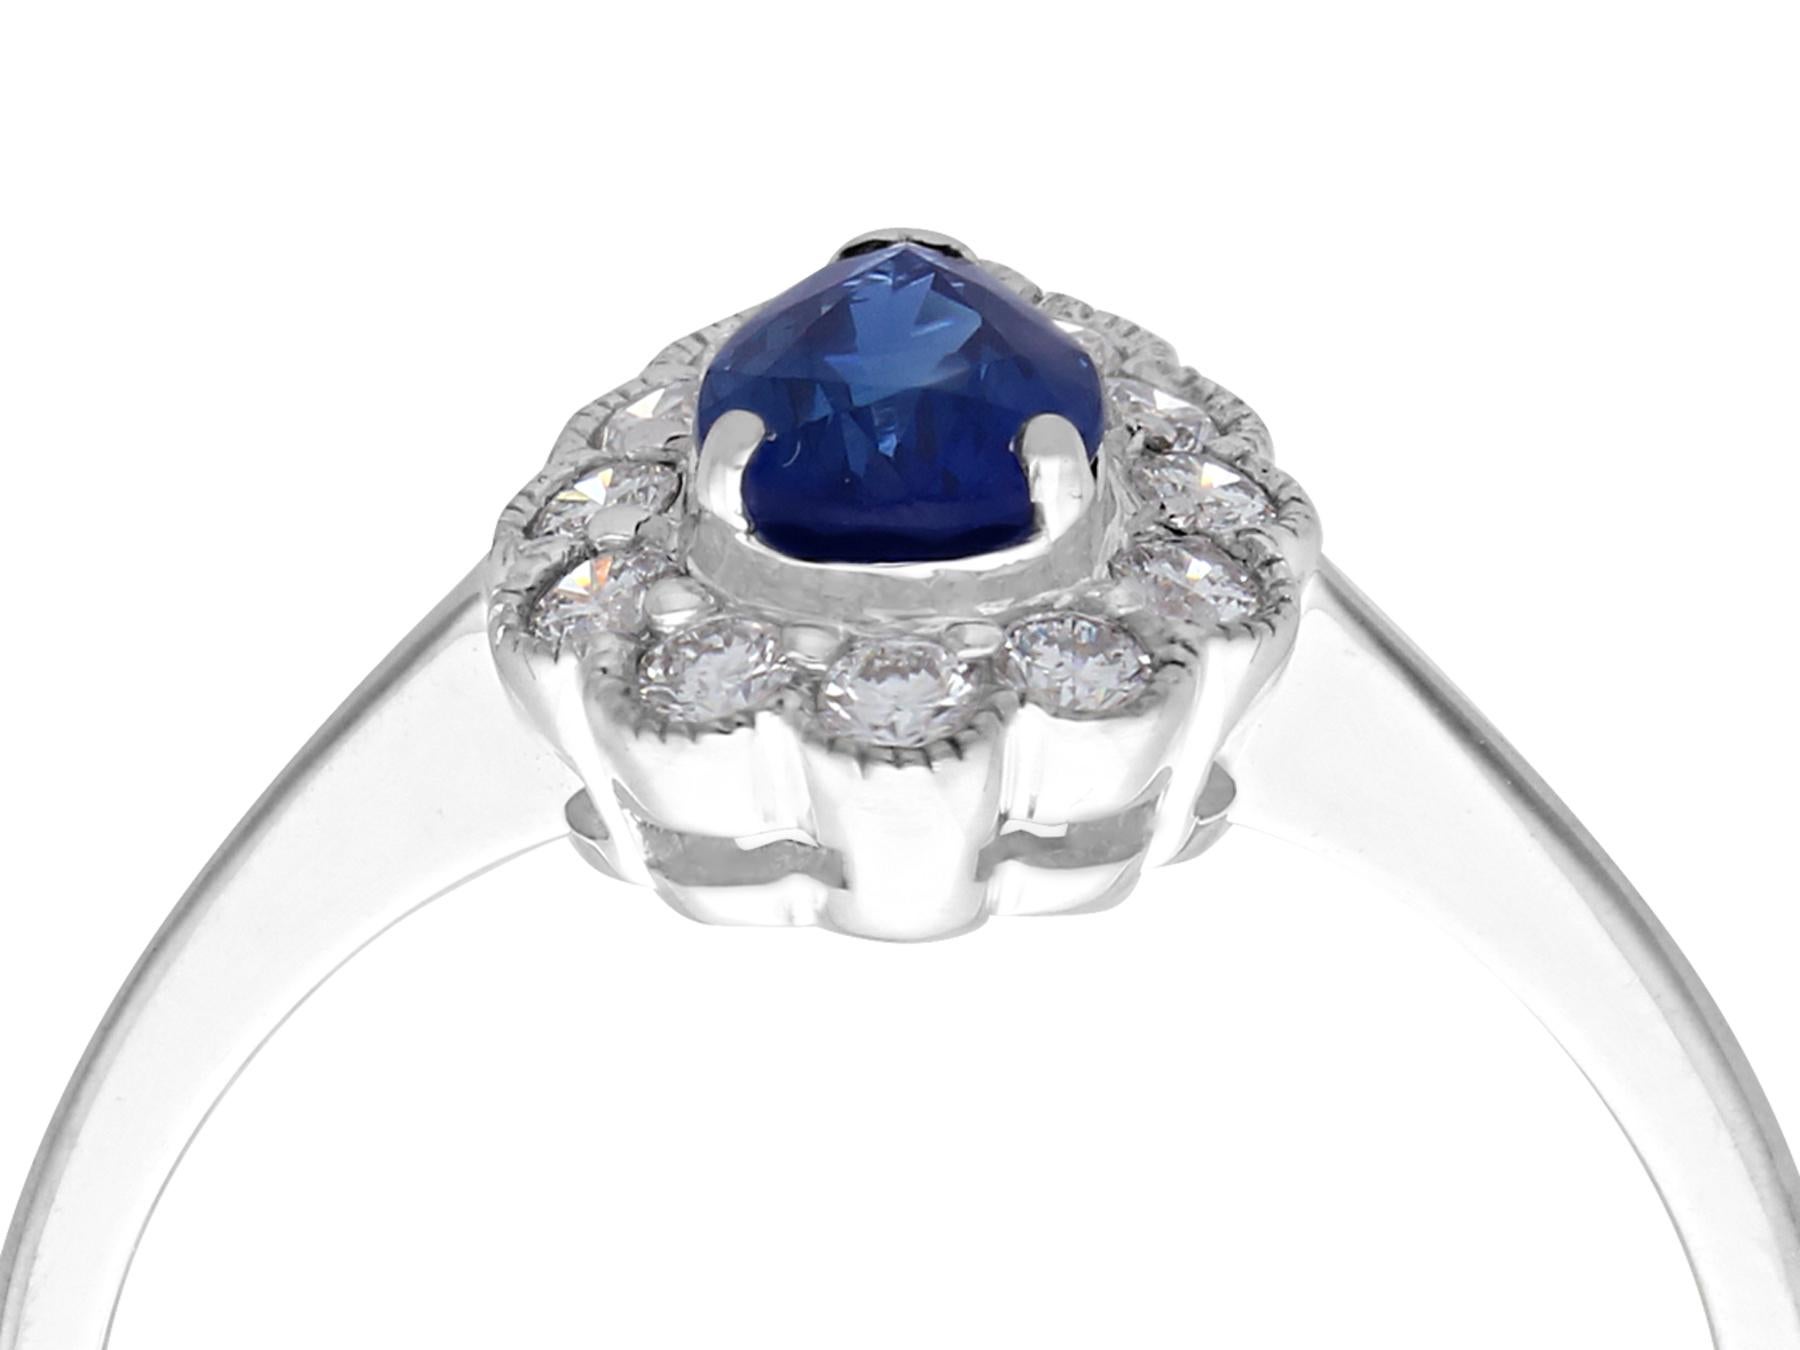 A fine and impressive contemporary 0.68 carat blue sapphire and 0.39 carat diamond, 18 karat white gold dress ring; part of our diverse contemporary jewelry collections.

This fine and impressive pear cut sapphire and diamond ring has been crafted